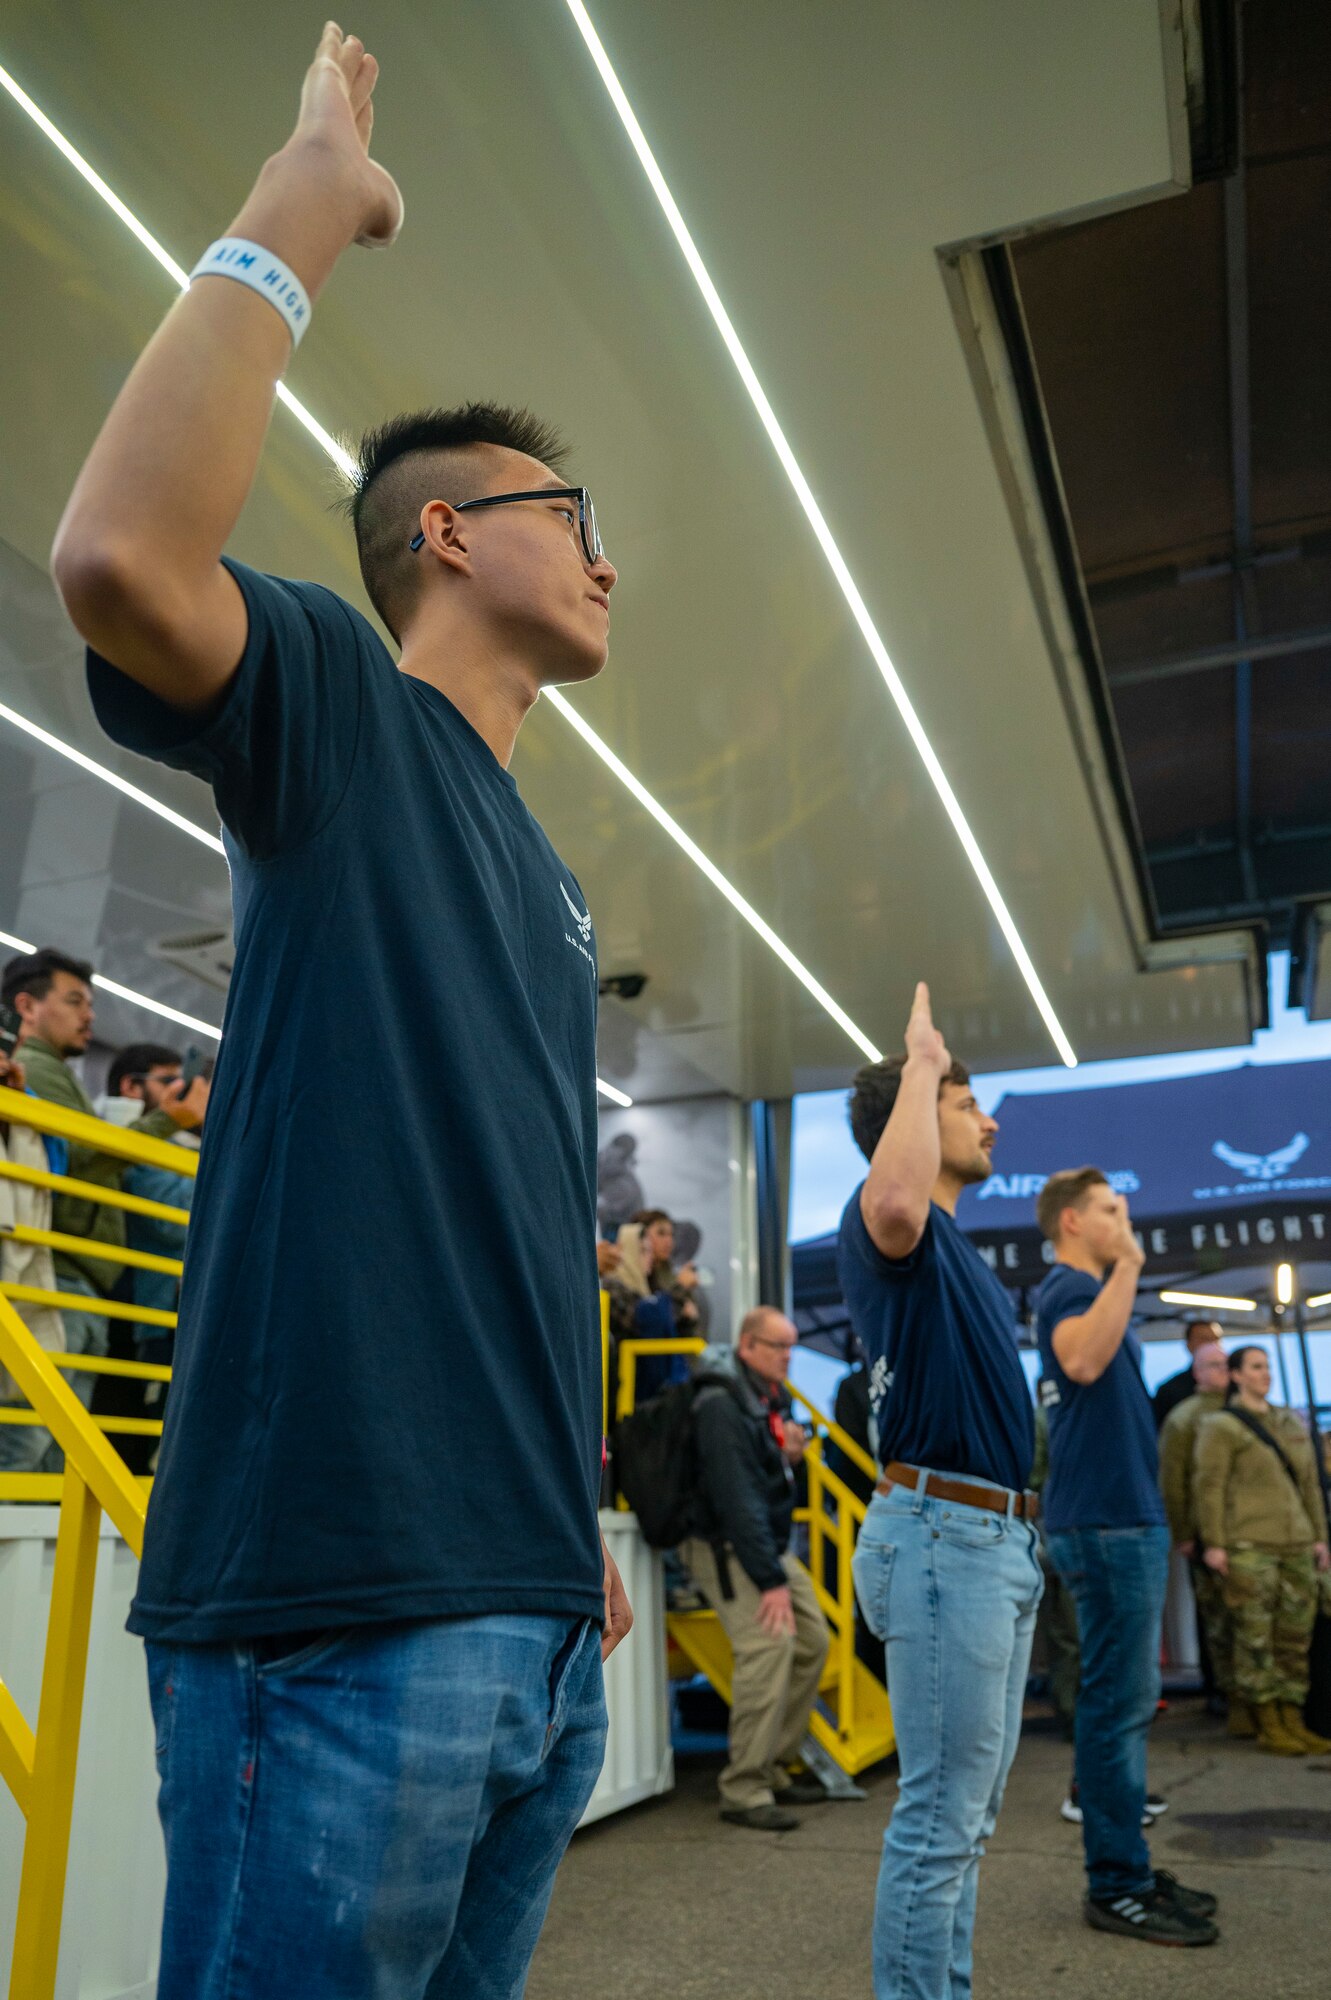 Citizens take the oath of enlistment for the U.S. Air Force